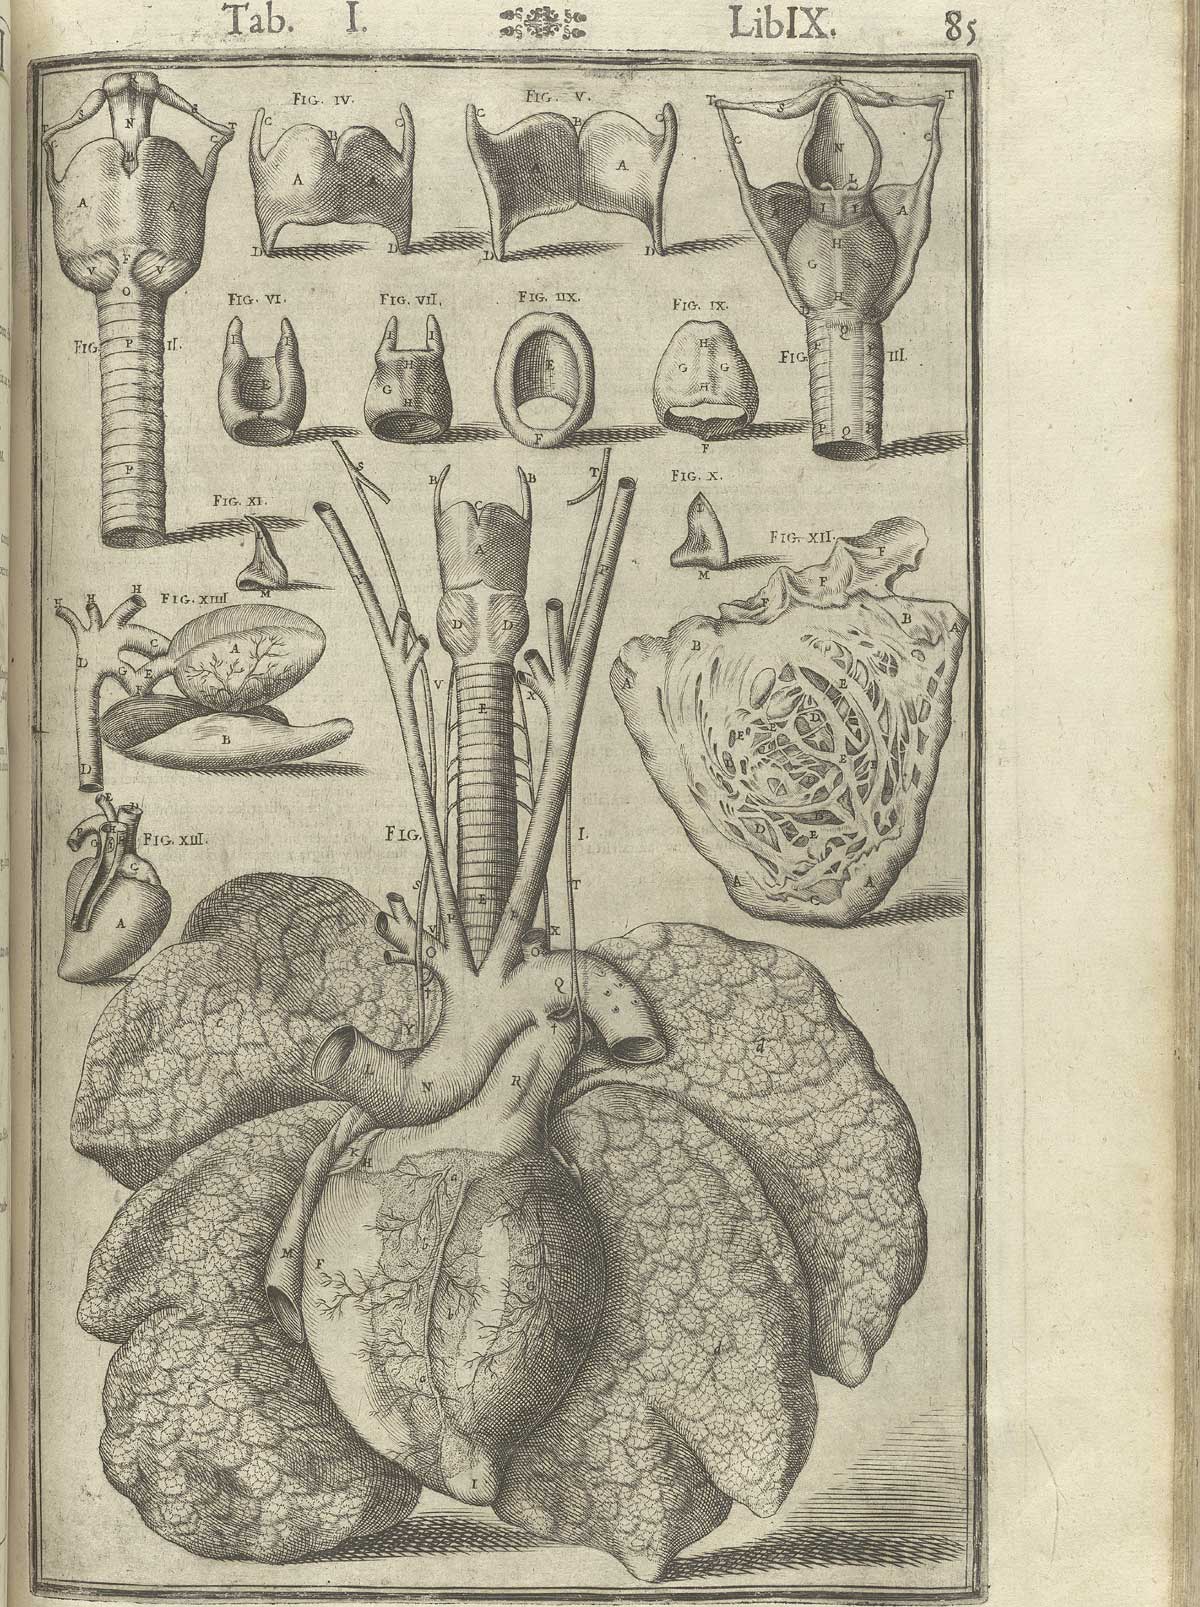 Engraving of the respiratory and cardiac systems, consisting of a set of lungs and a heart at the bottom of the image surrounded by views of the trachea, the heart, and the hyoid bone; from Adriaan van de Spiegel and Giulio Cassieri’s De humani corporis fabrica libri decem, Venice, 1627, NLM call no. WZ 250 S755dh 1627.